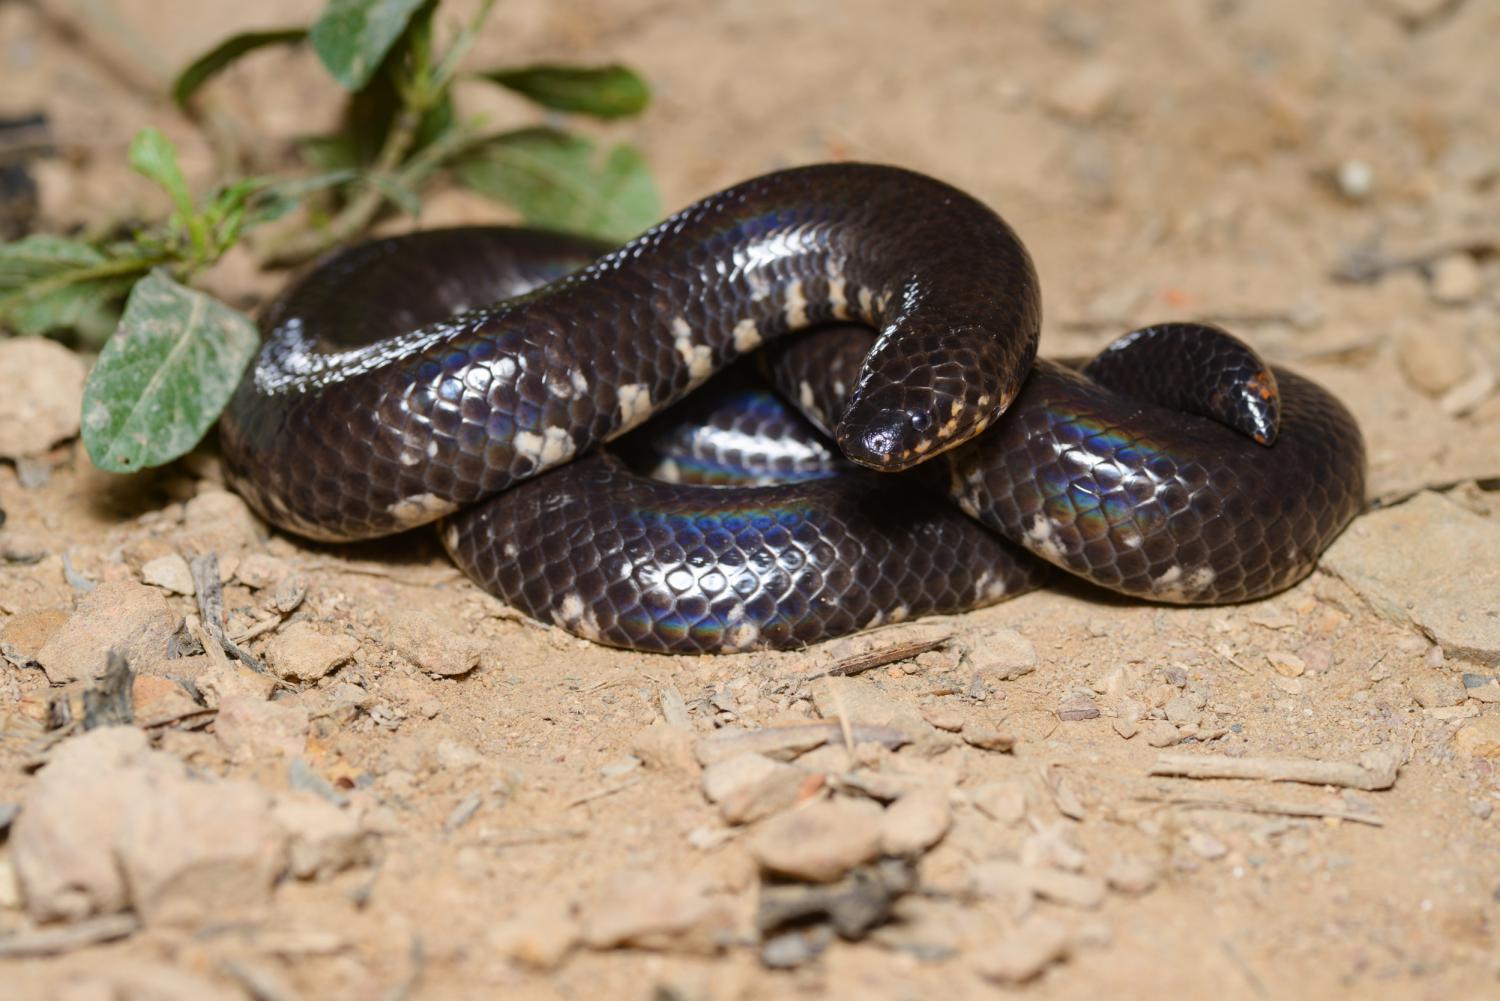 https://static.thainationalparks.com/img/species/2017/11/20/328610/cylindrophis-jodiae-w-1500.jpg